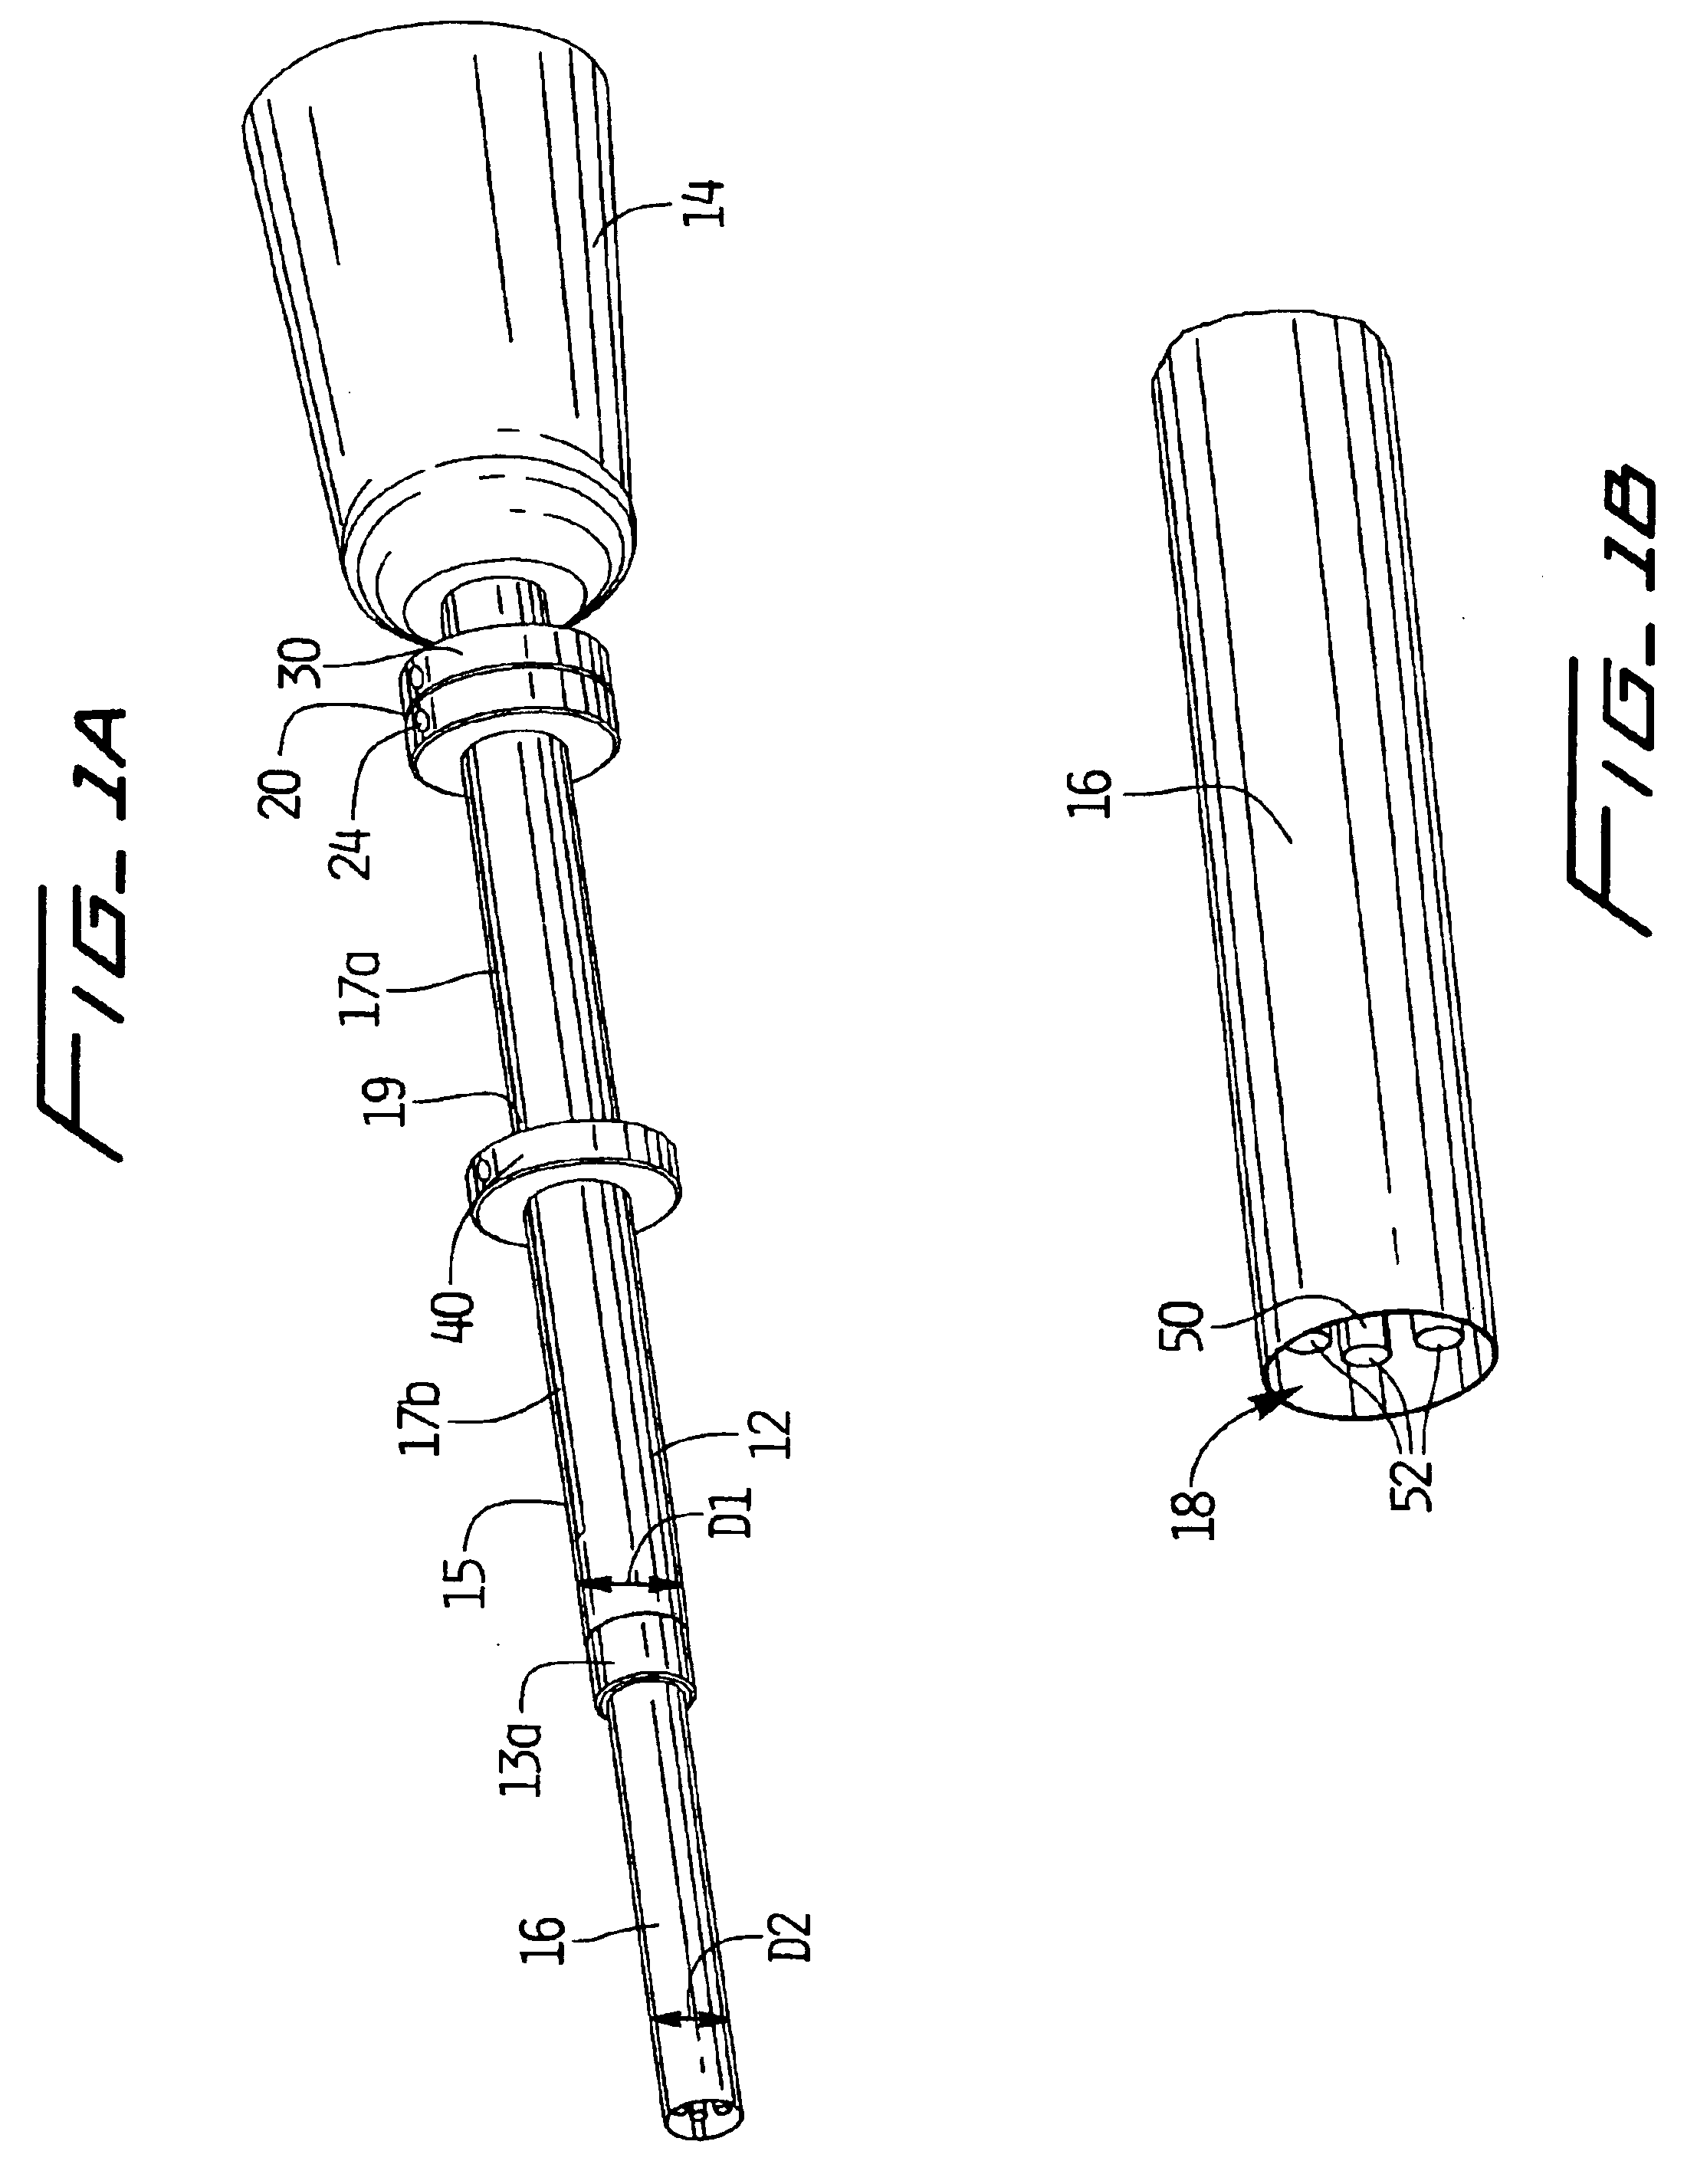 Surgical biopsy device